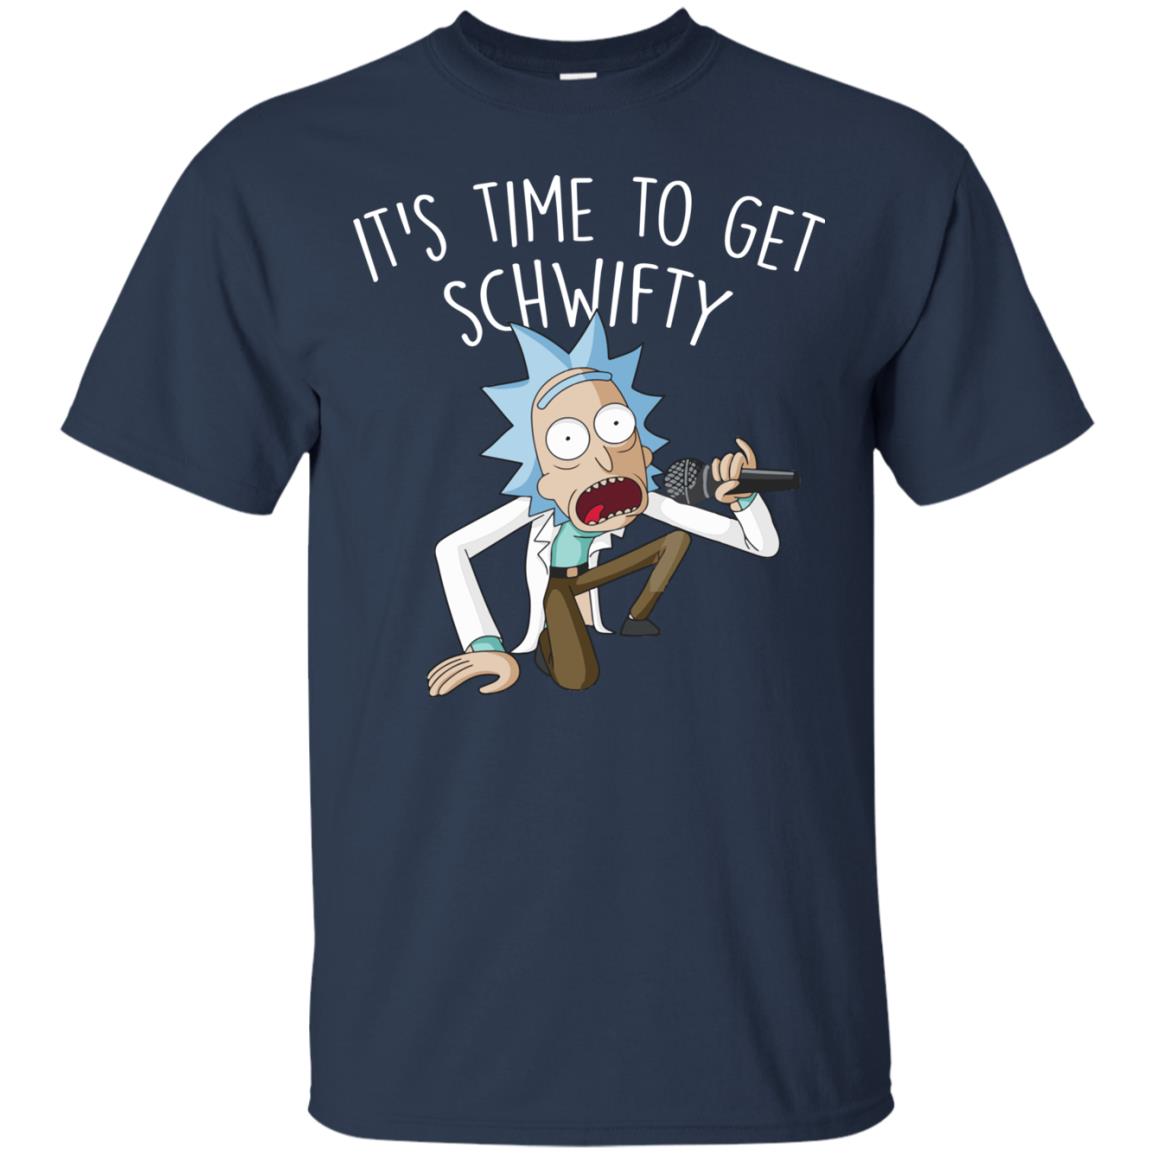 Rick and Morty: It’s Time to Get Schwifty t shirt, long sleeve, tank ...